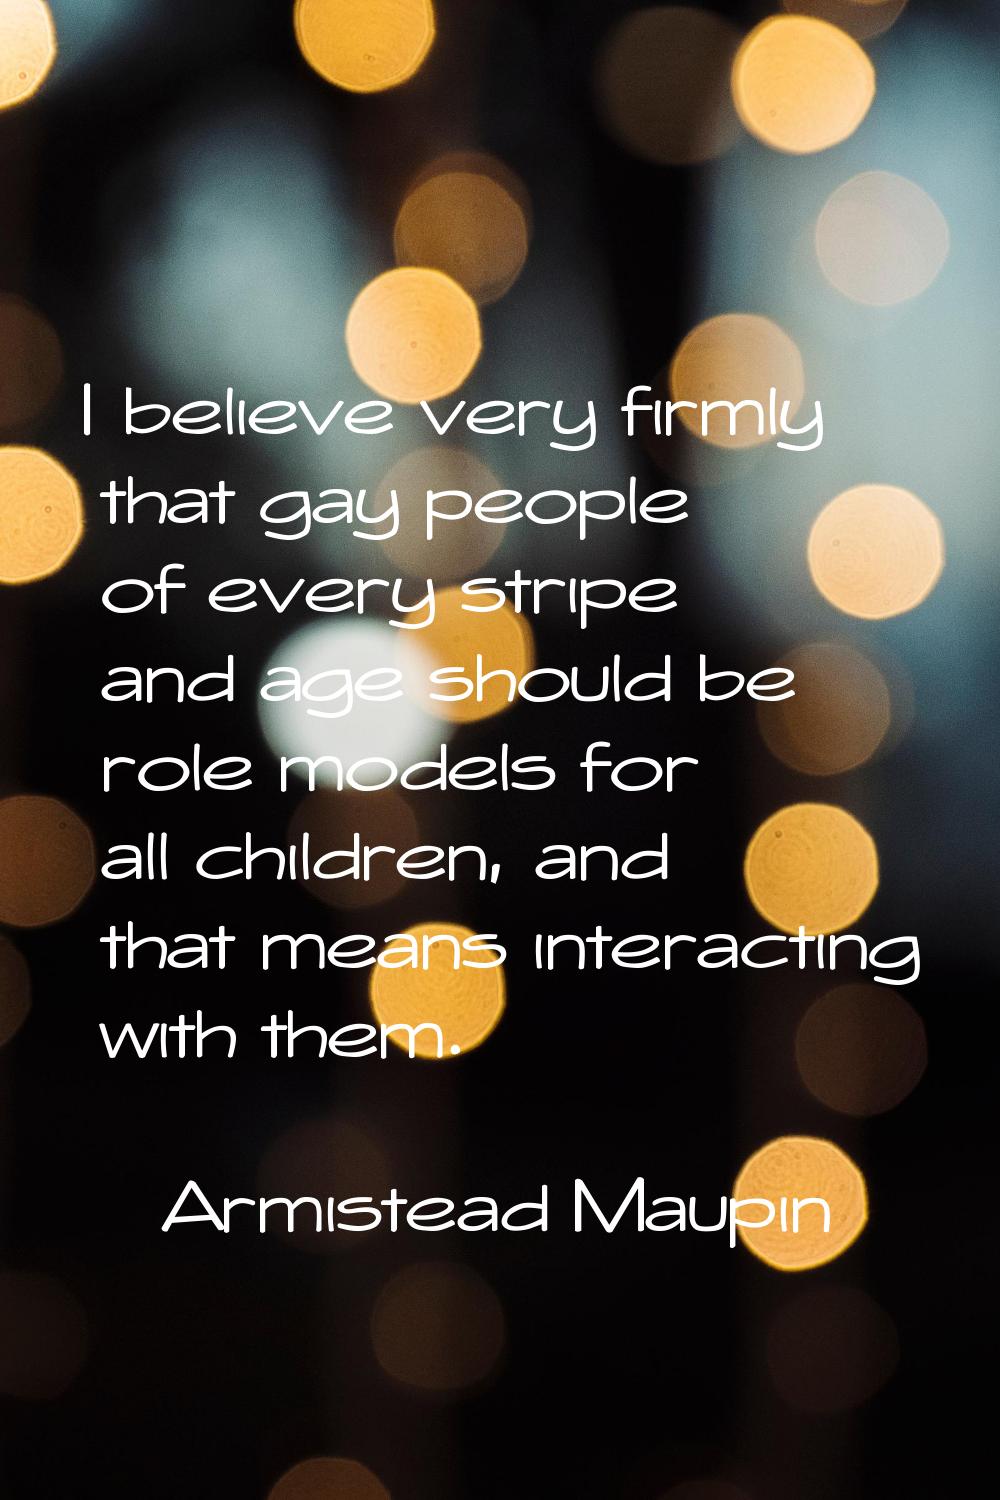 I believe very firmly that gay people of every stripe and age should be role models for all childre